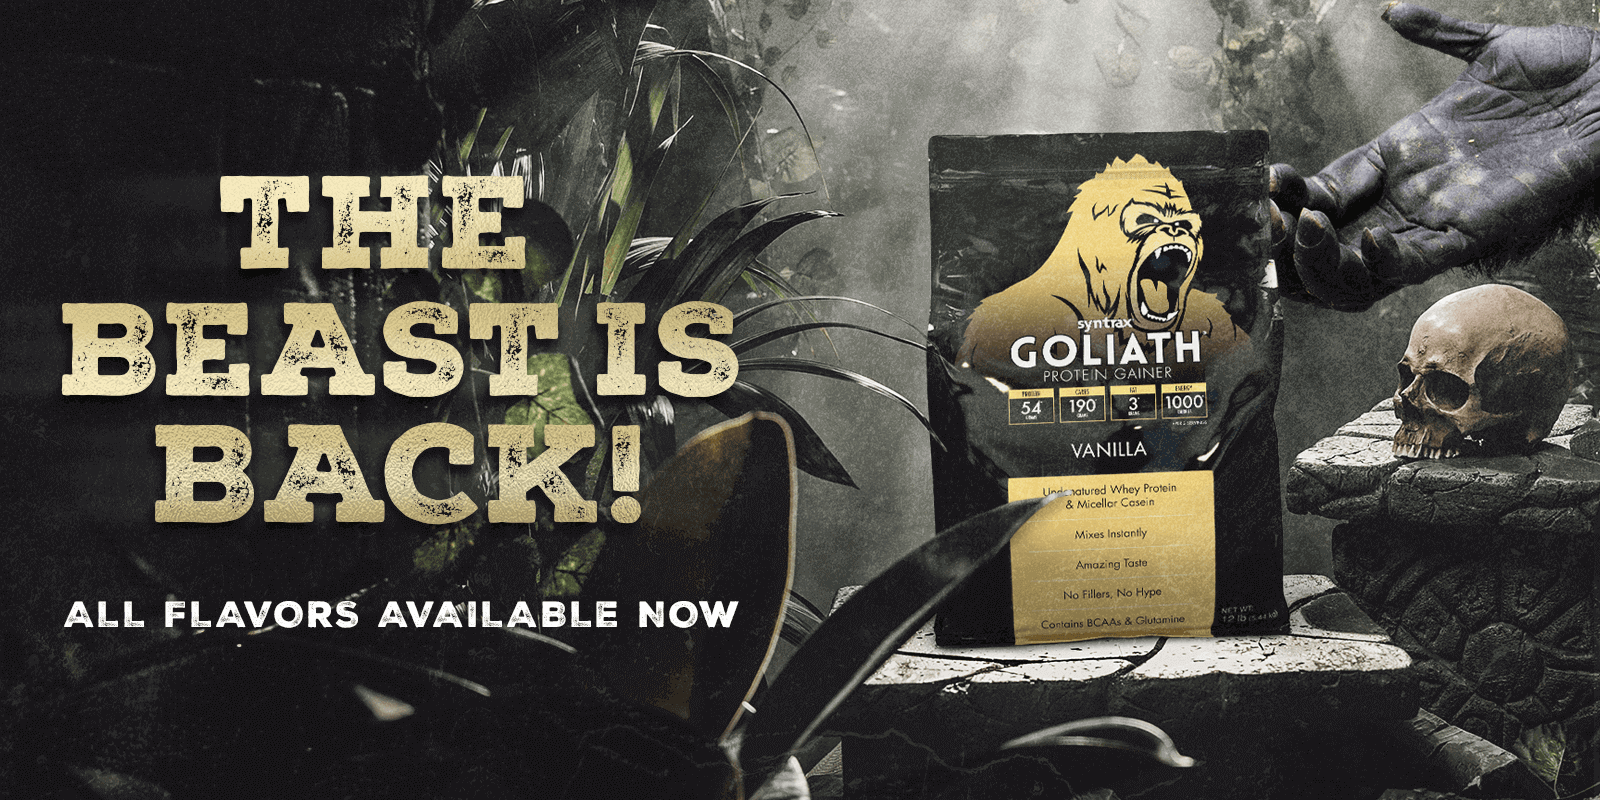 Goliath is back in stock